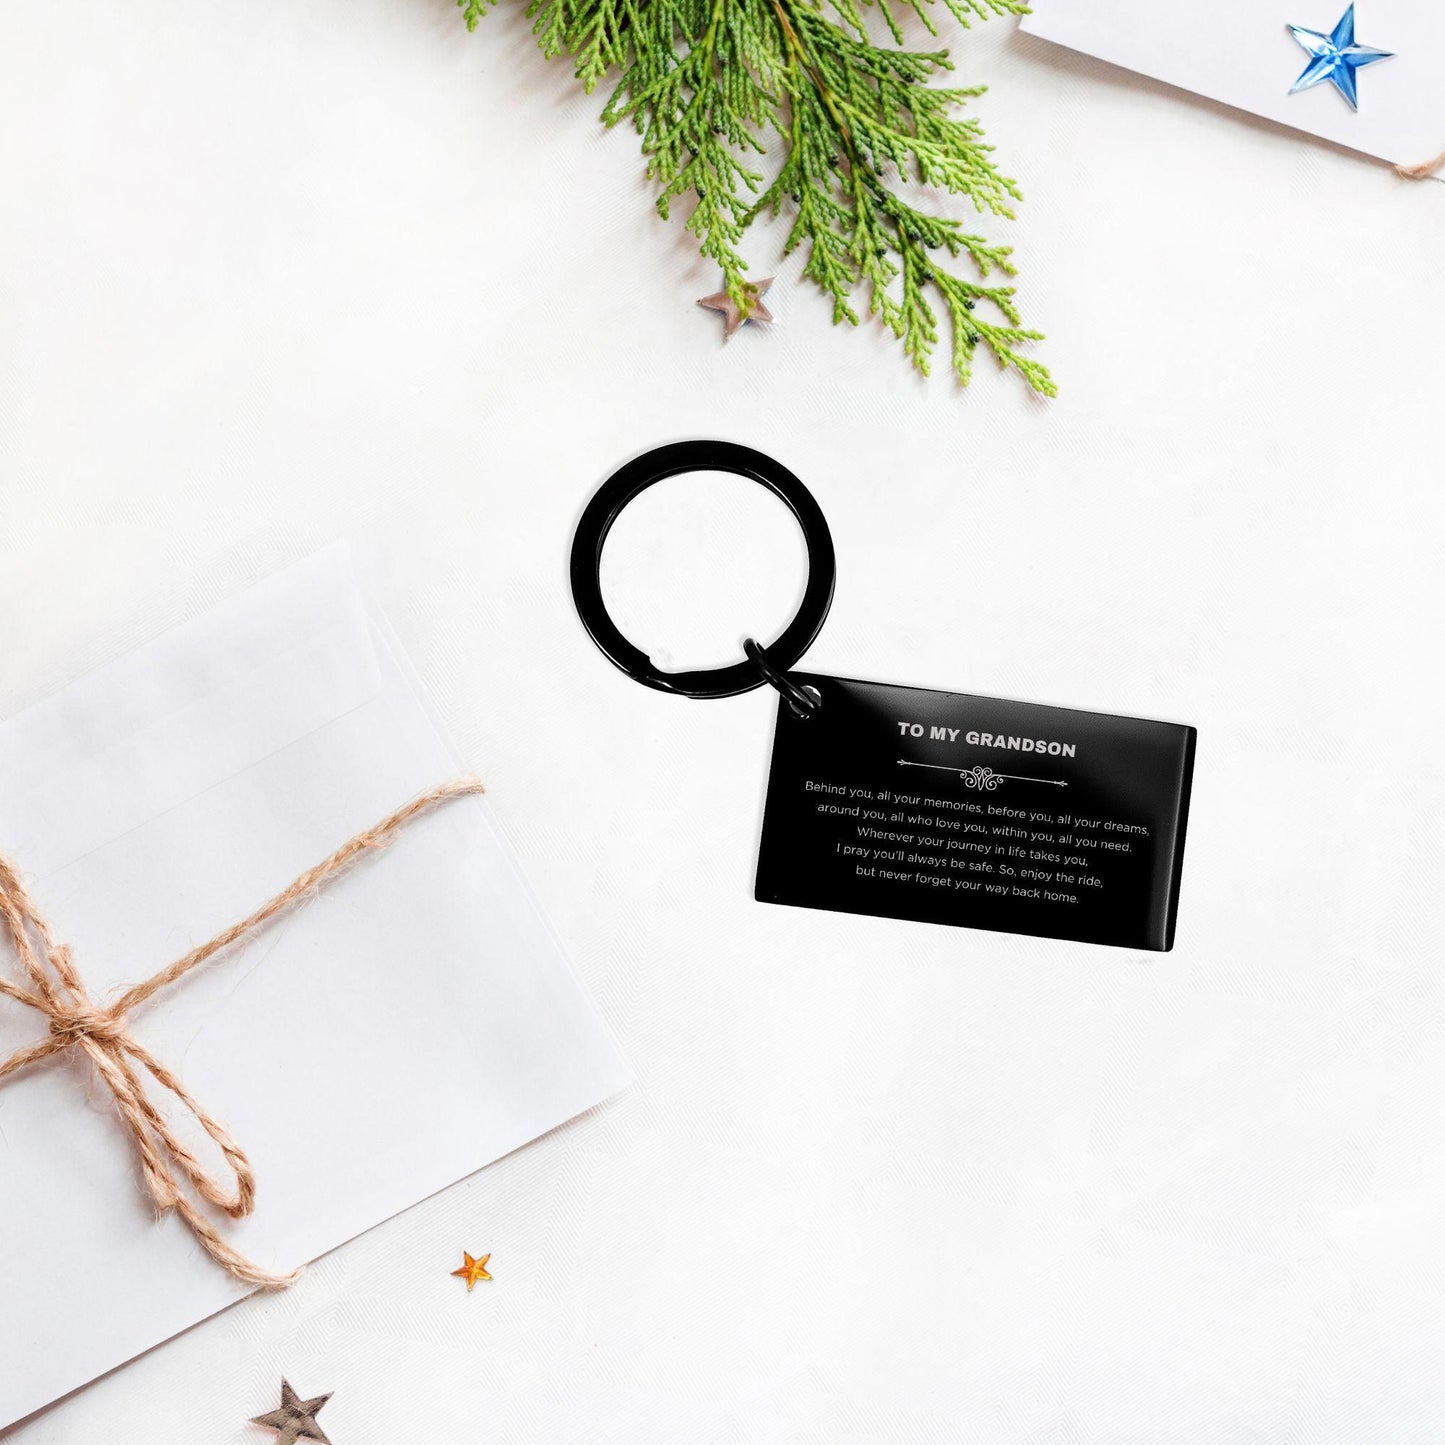 Inspirational Grandson Black Engraved Keychain - Behind you, all your Memories, Before you, all your Dreams - Birthday, Christmas Holiday Gifts - Mallard Moon Gift Shop